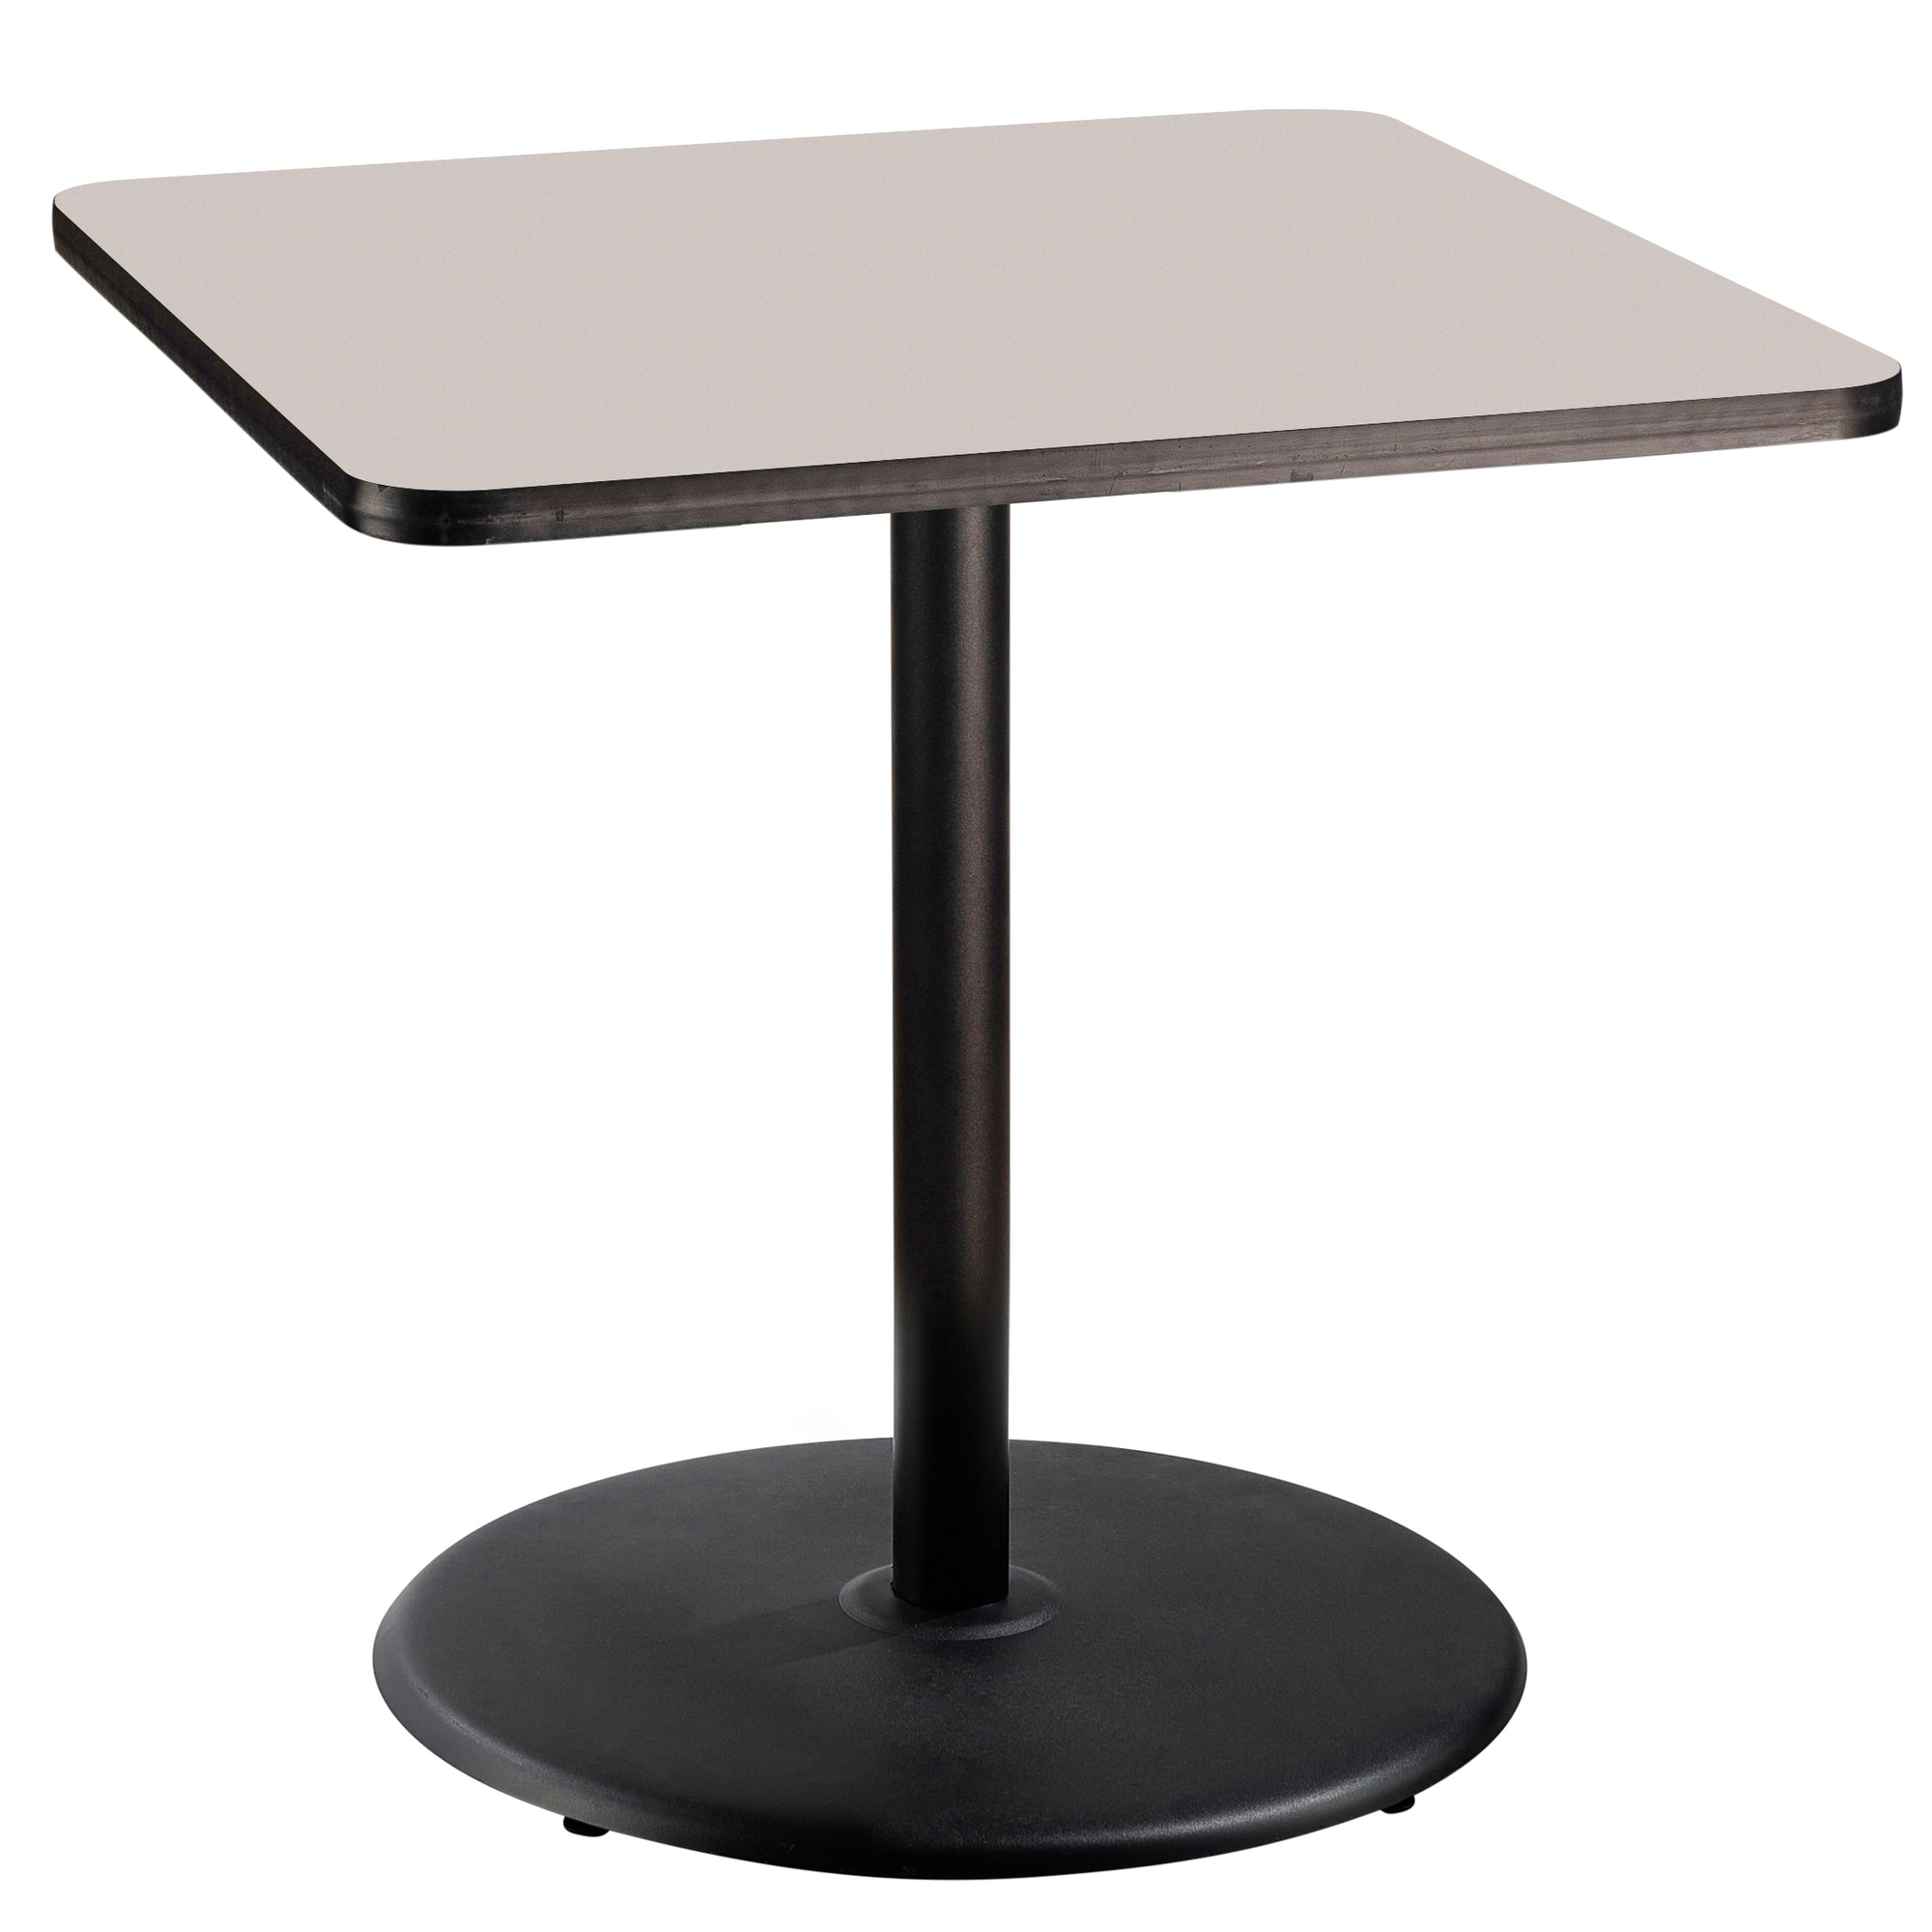 "National Public Seating, Cafe Table, 36x36x36 Square ""R"" Base, Height 36 in, Model CT33636RCPBTMGY"